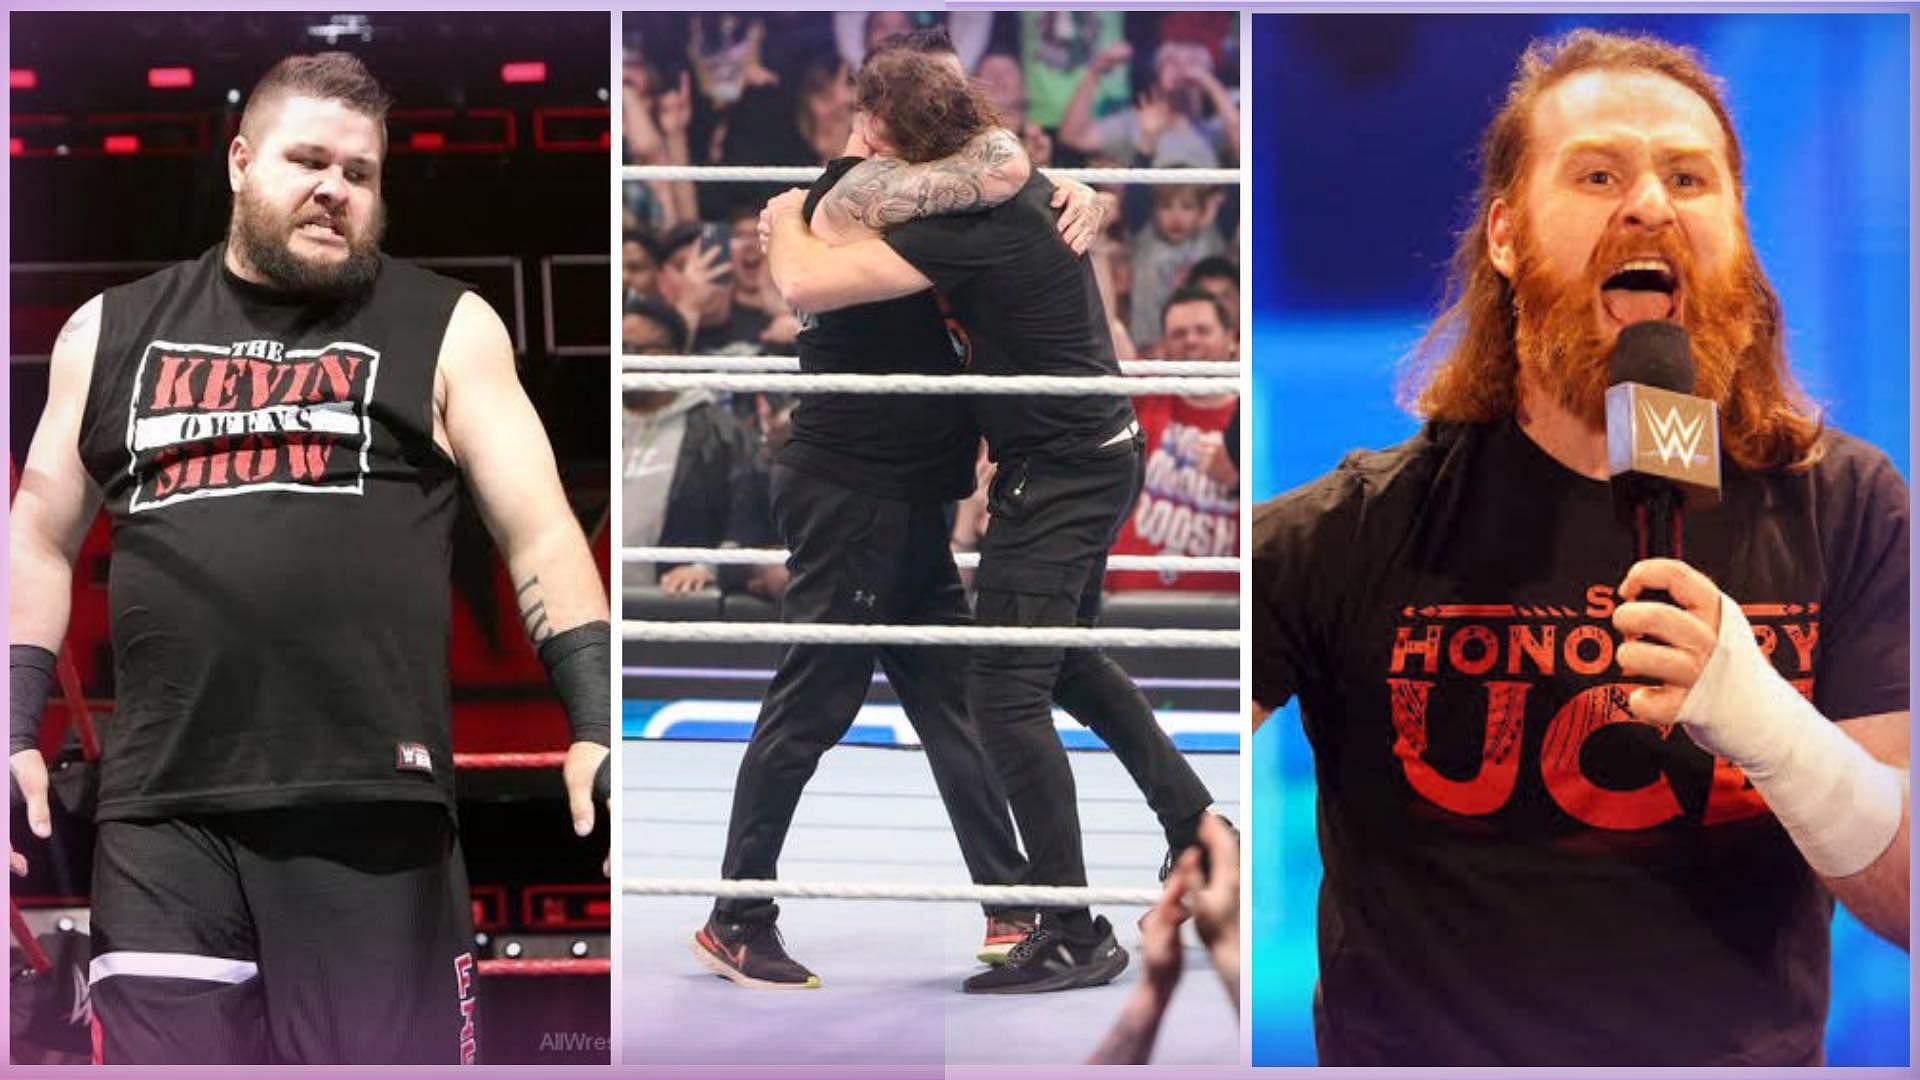 Could Sami Zayn betray his long-time best friend Kevin Owens following the two reuniting on WWE SmackDown?